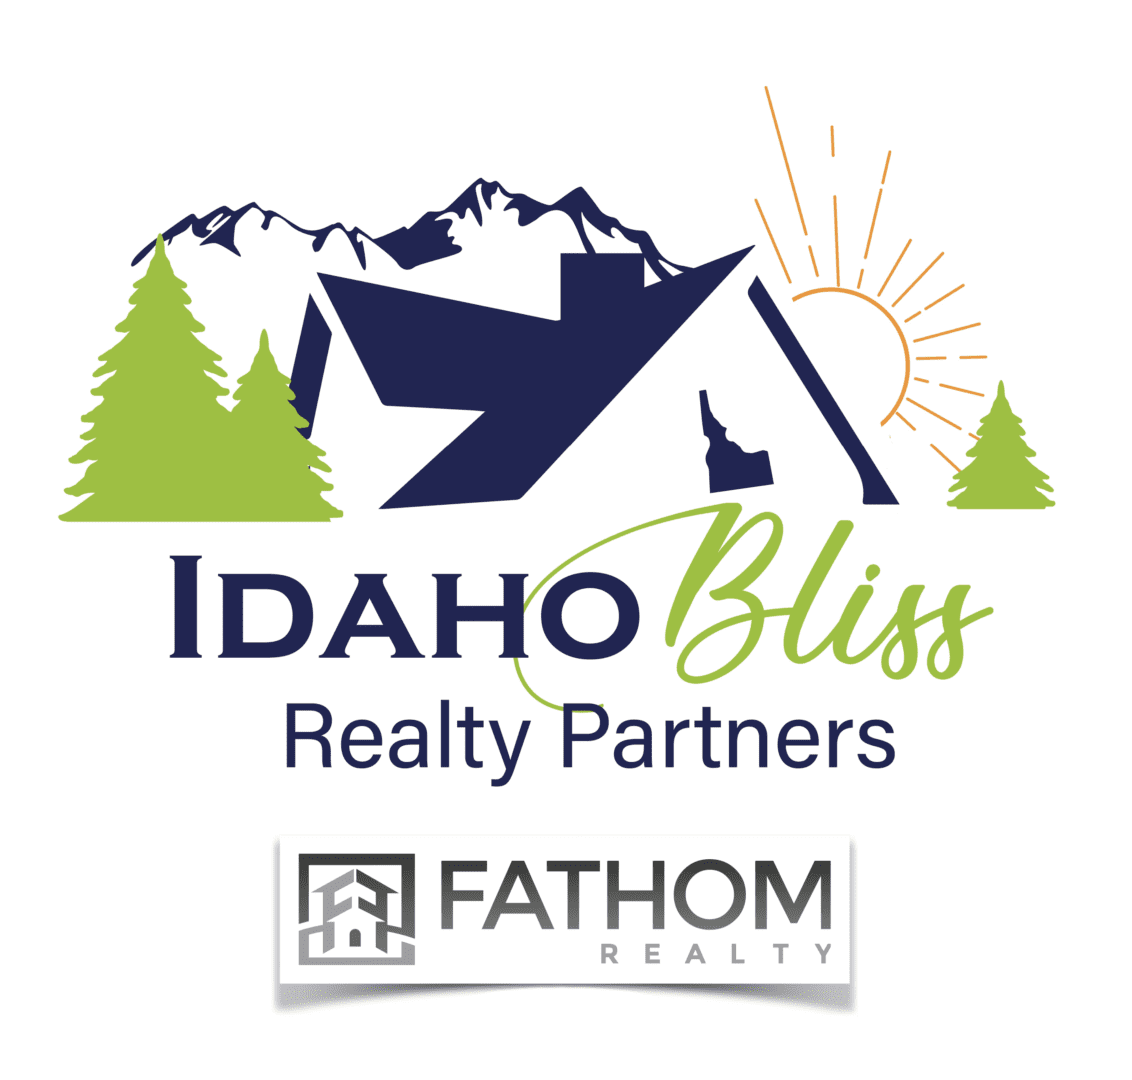 Military Friendly Real Estate Agent in Meridian, ID: Idaho Bliss Realty